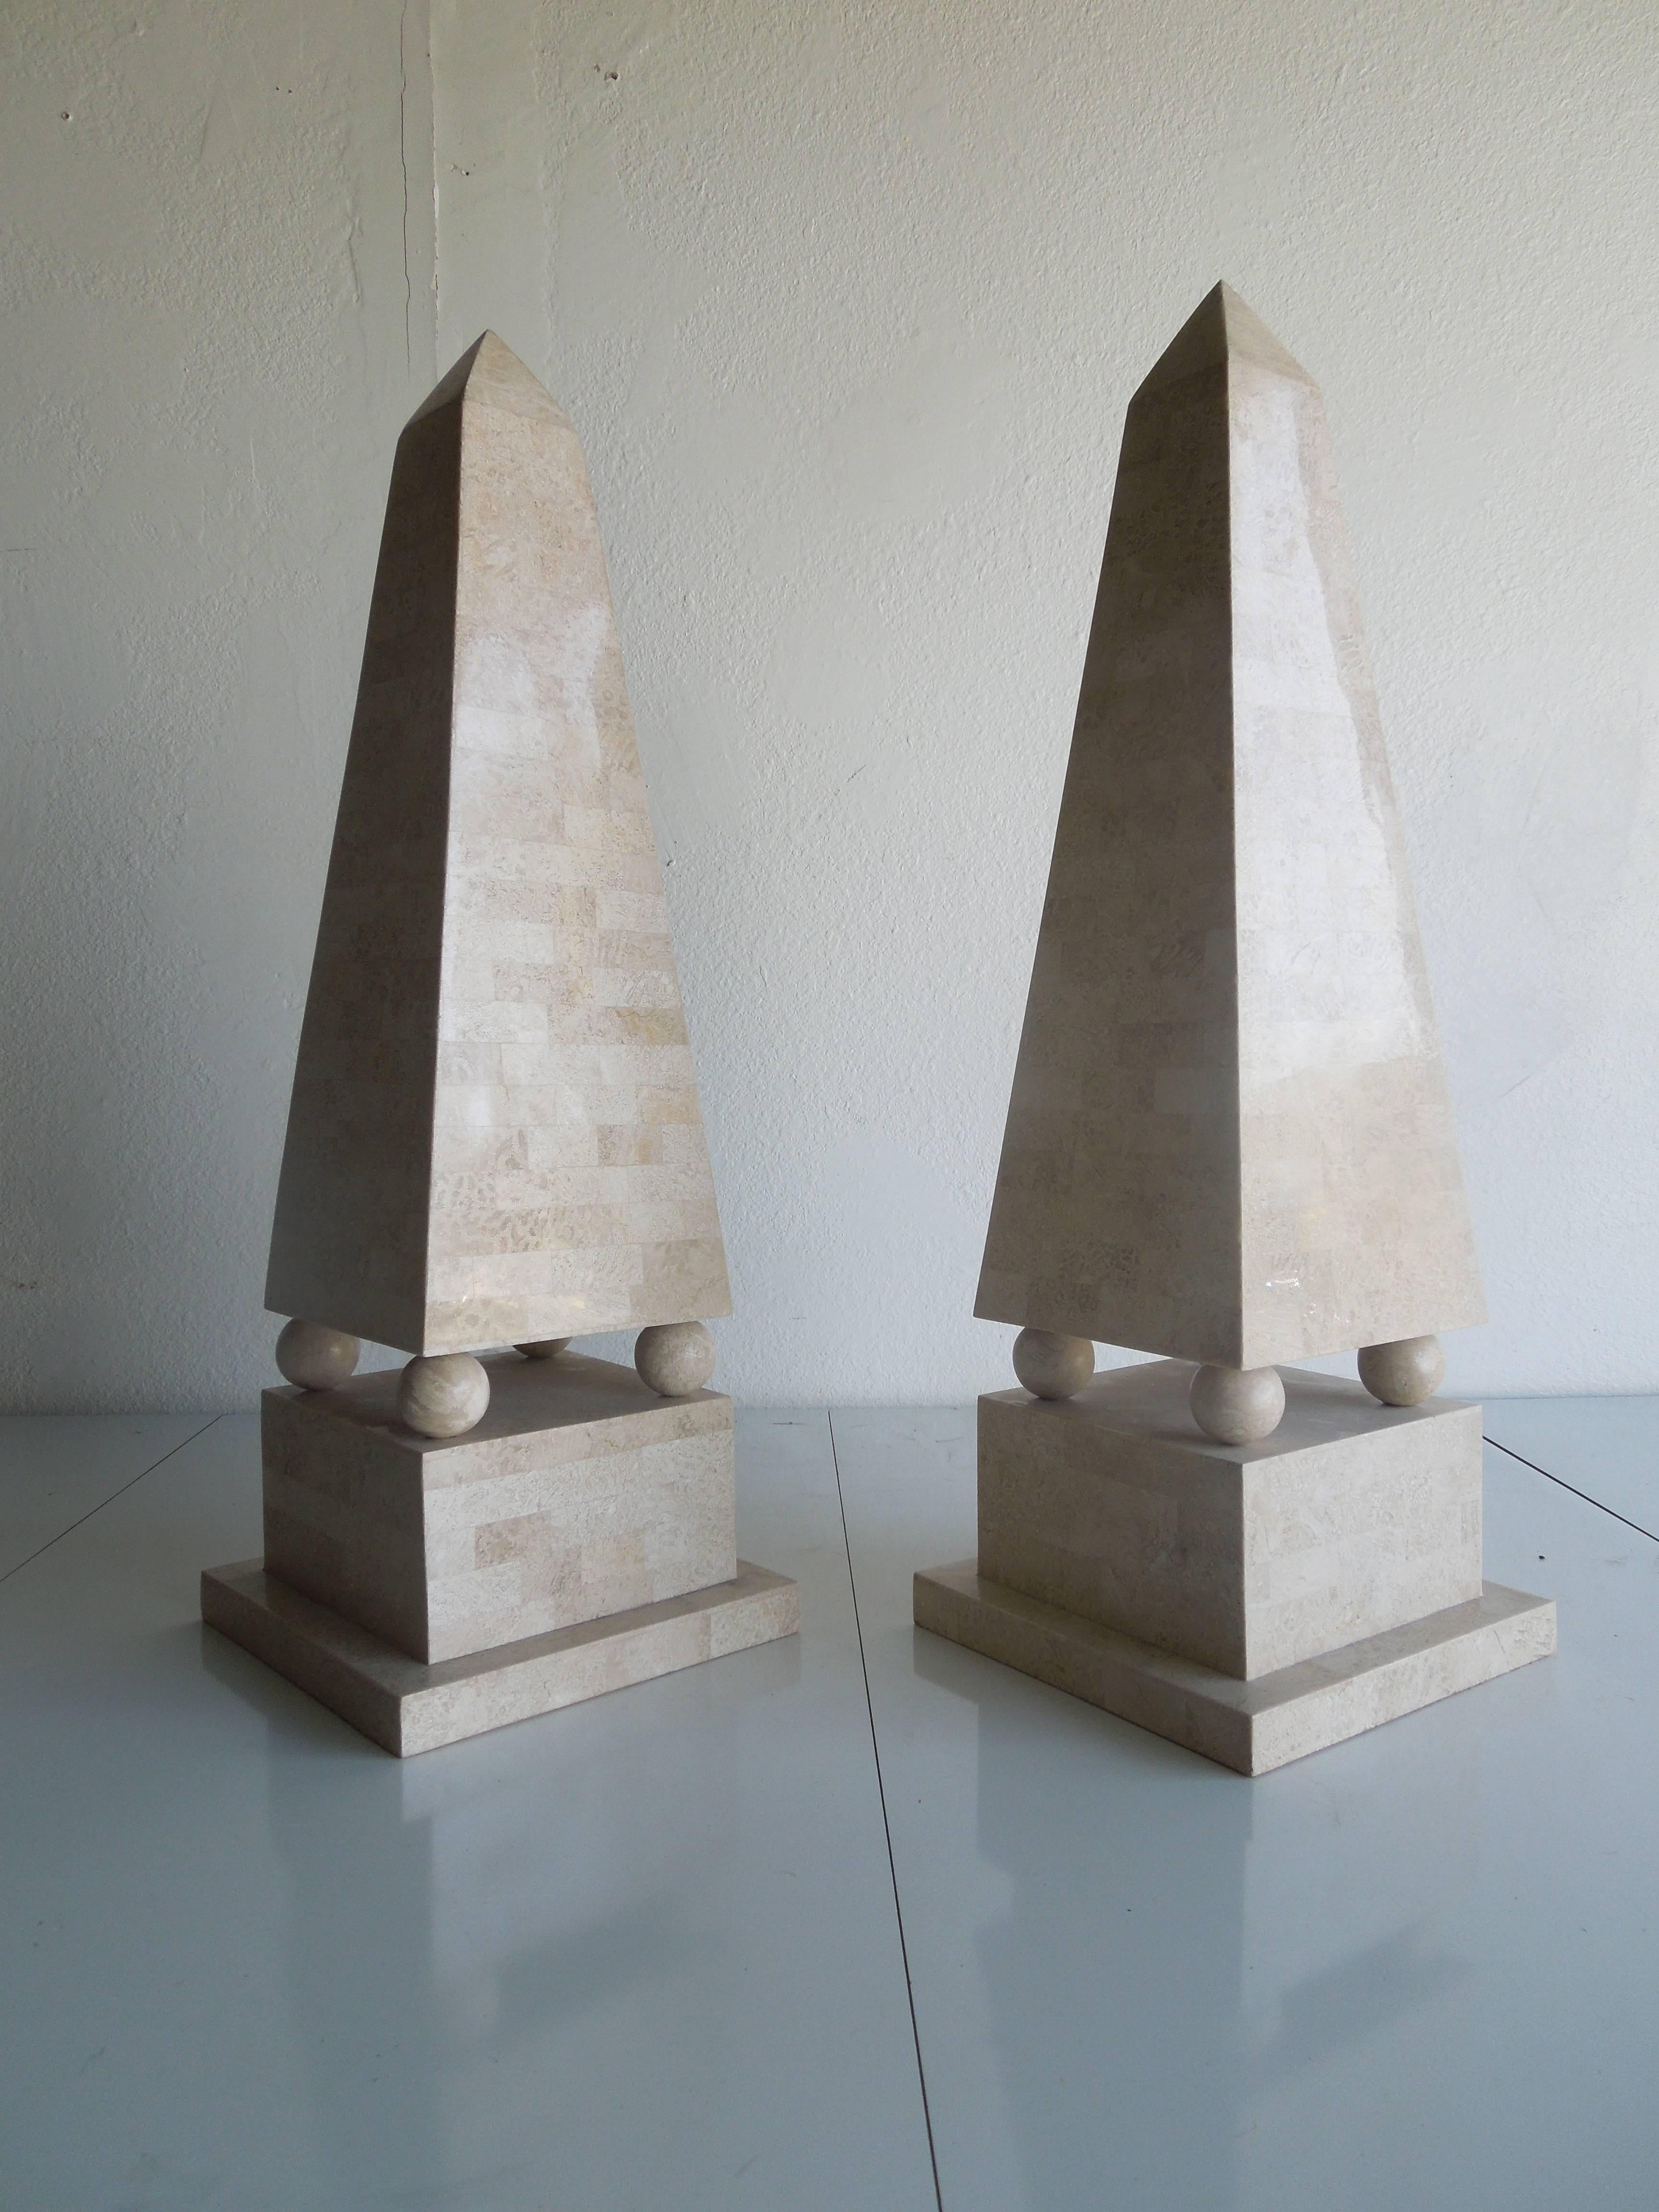 From a very upscale Palm Springs estate, a rare pair of large tessellated stone obelisks done in the 